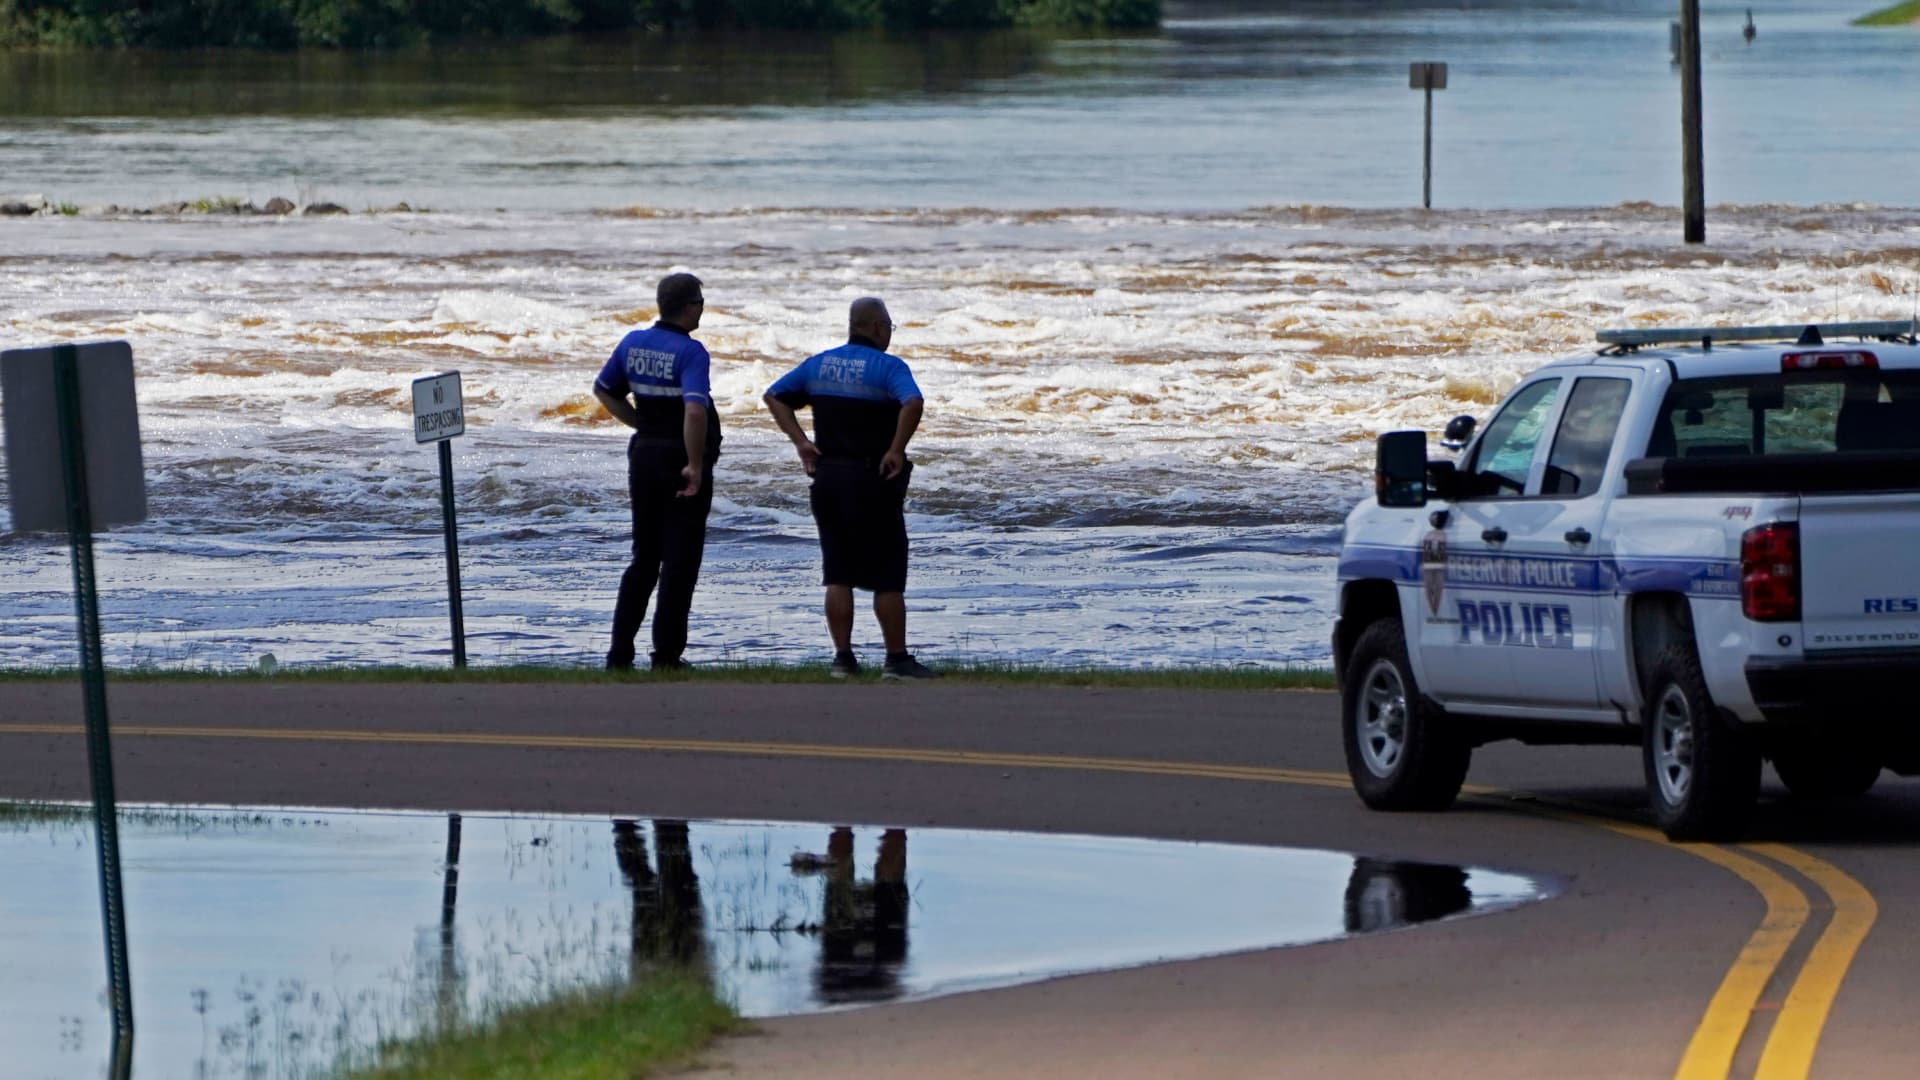 Reservoir police observe the water release from the Ross Barnett Reservoir Spillway onto the Pearl River, Sunday, Aug. 28, 2022, in Rankin County, Miss.